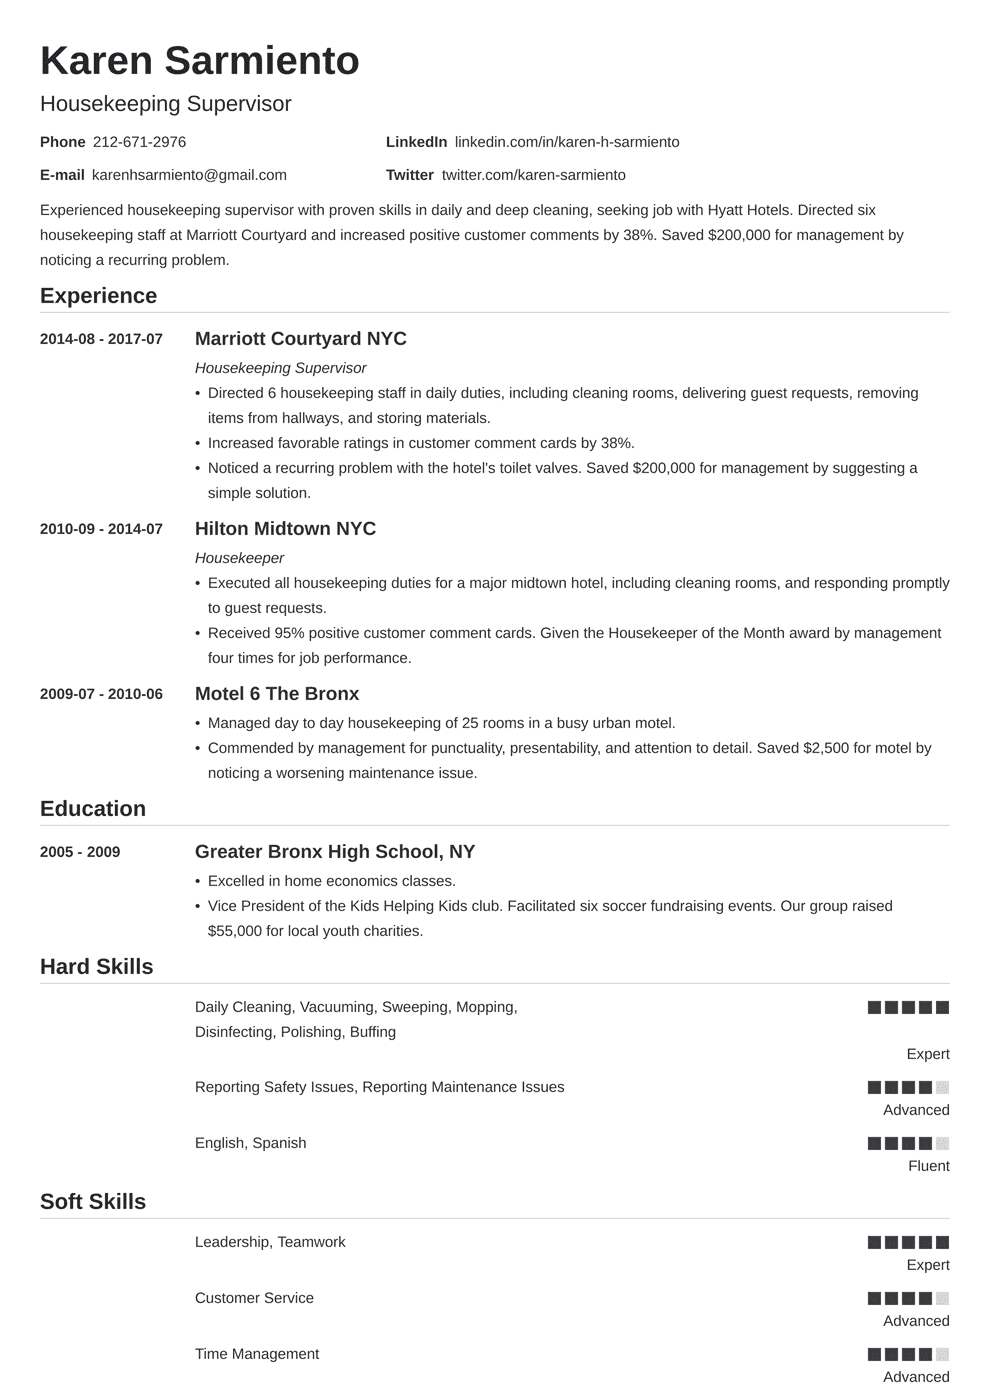 example resume objectives for housekeeper